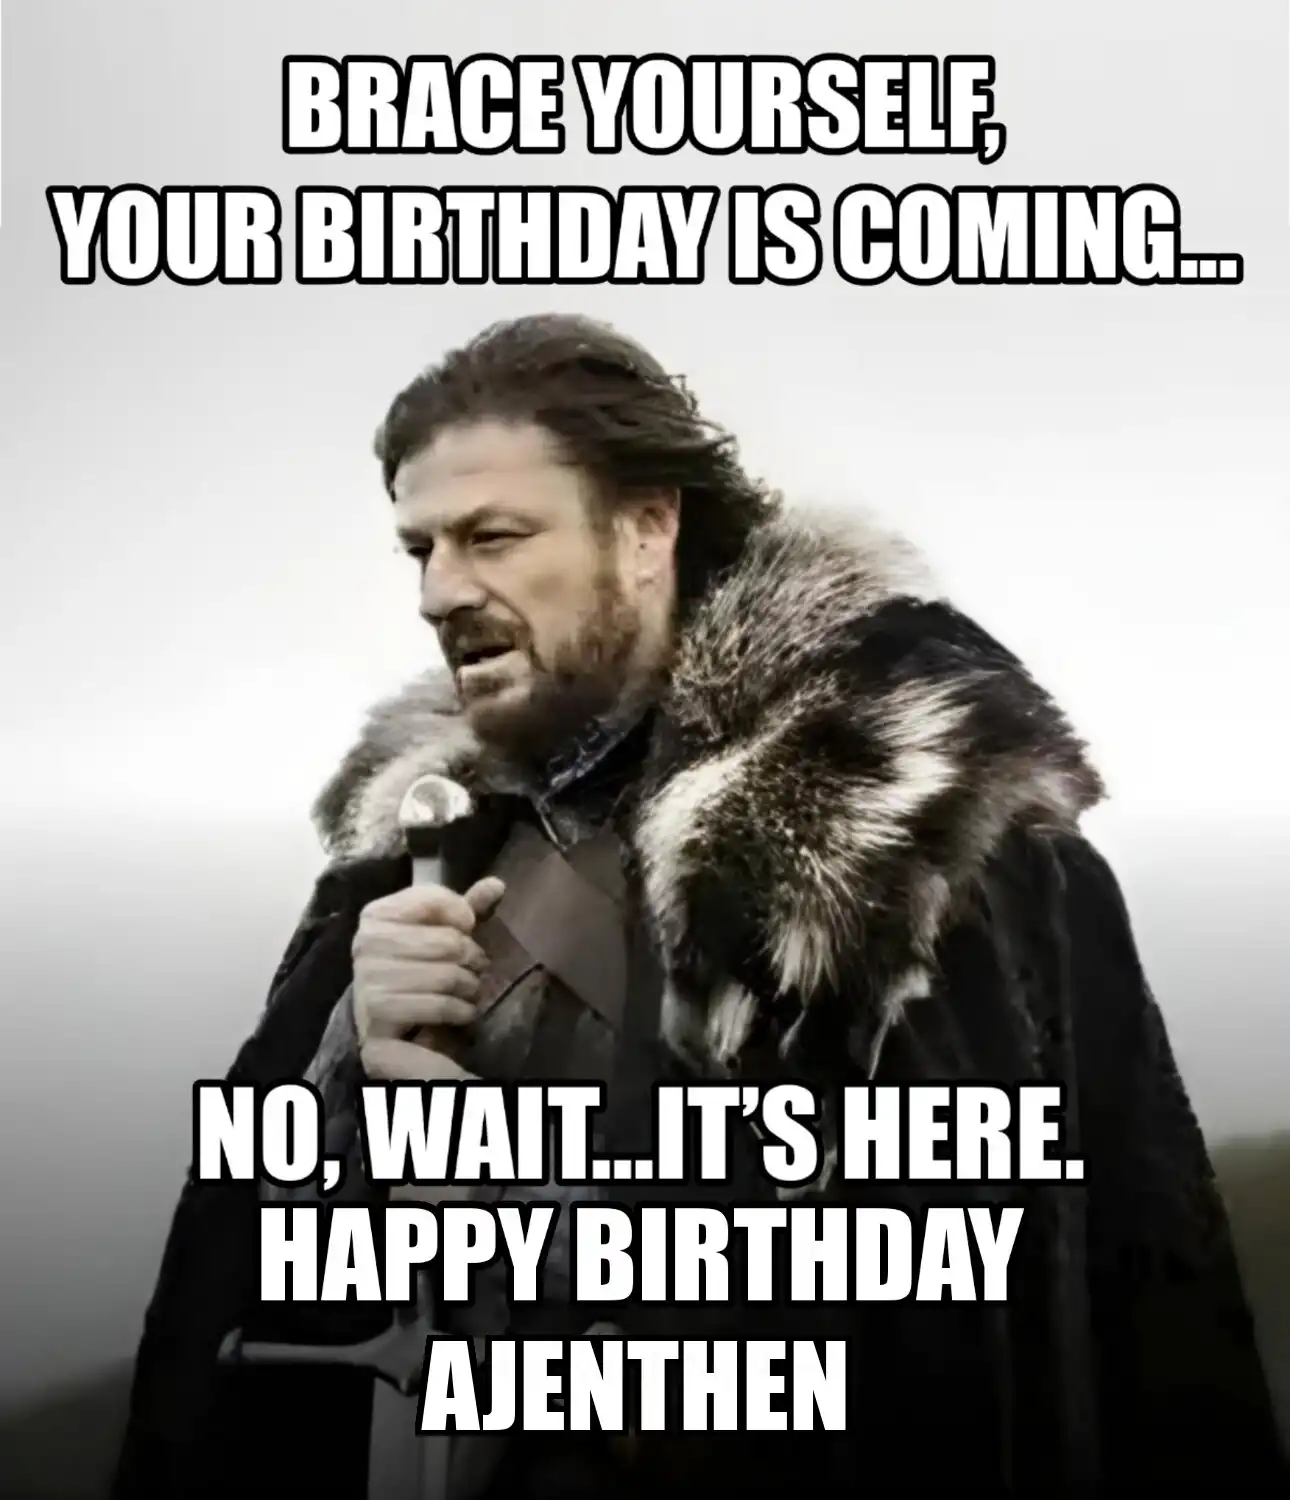 Happy Birthday Ajenthen Brace Yourself Your Birthday Is Coming Meme